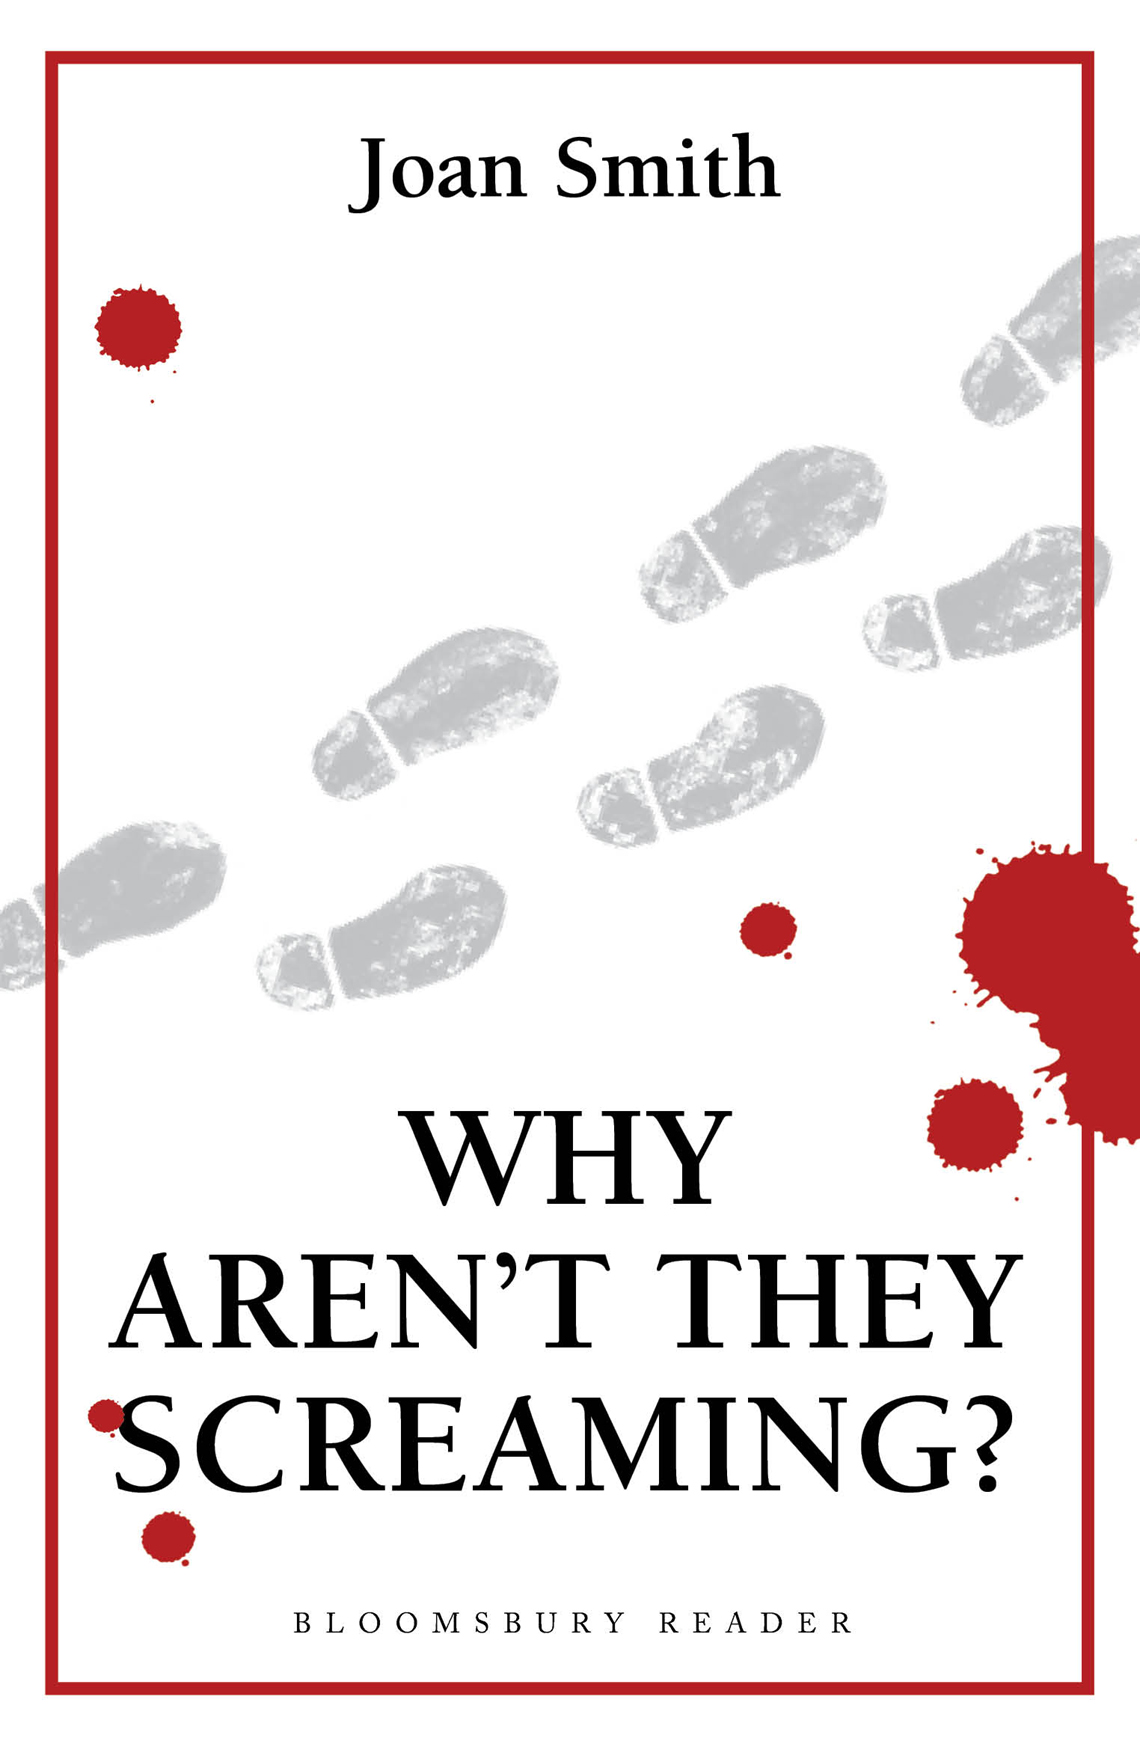 Why Aren't They Screaming? (1988) by Joan Smith